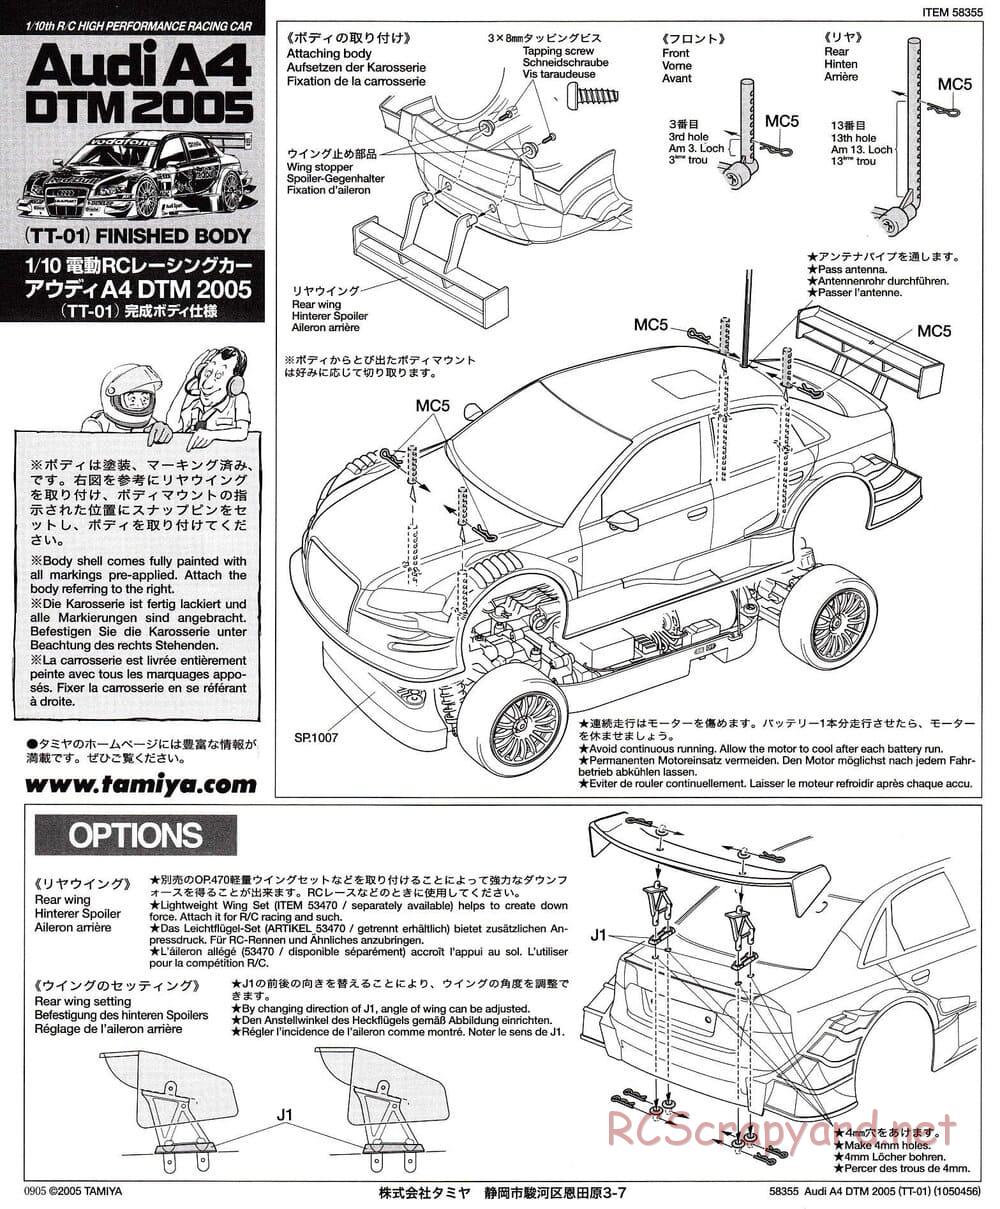 Tamiya - Audi A4 DTM 2005 Red Bull - TT-01 Chassis - Body Manual - Page 1